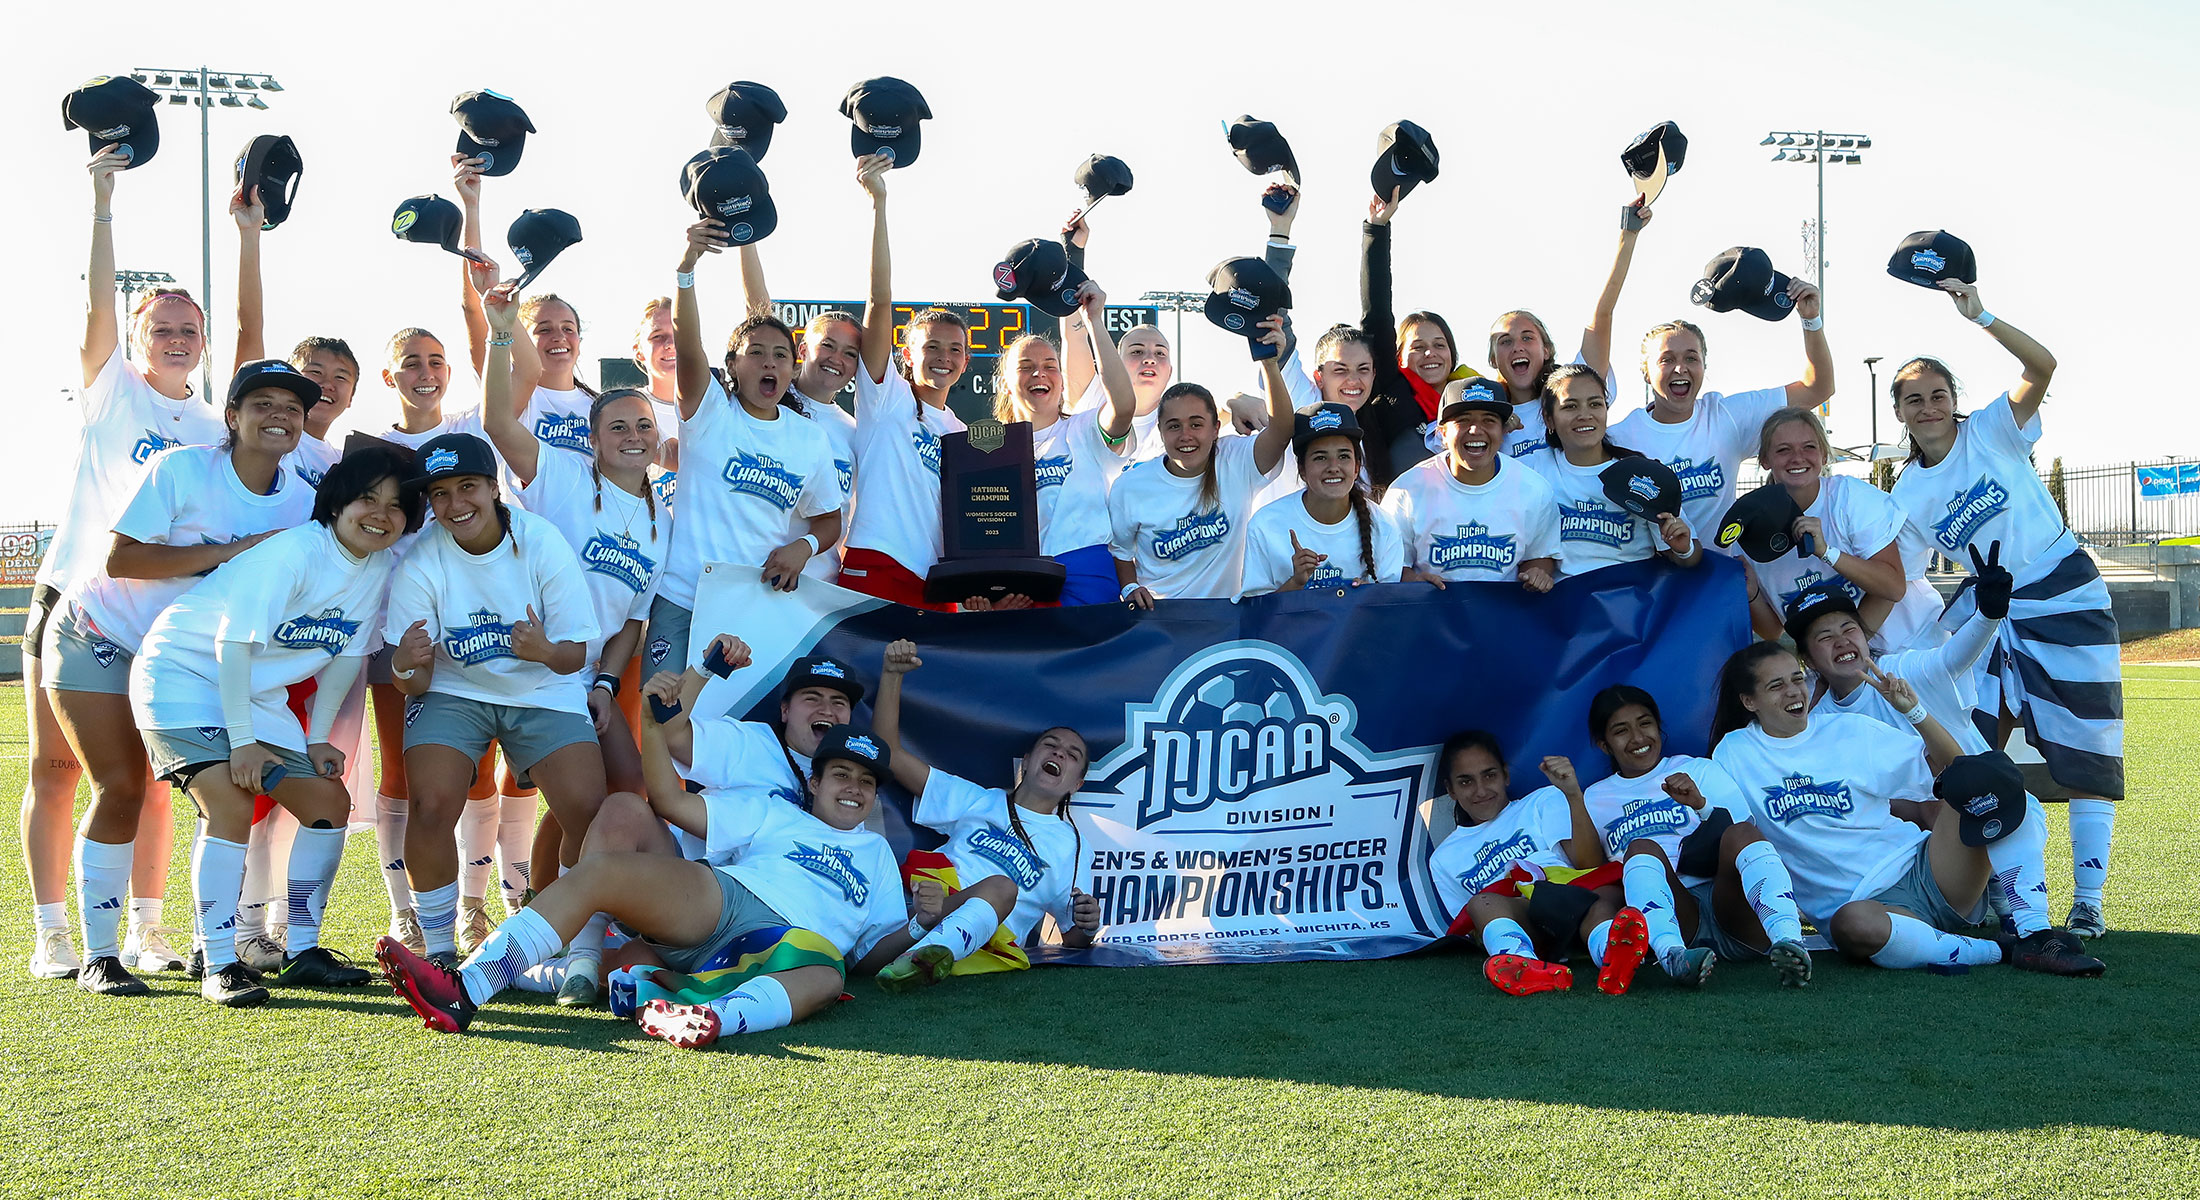 Golden Goal Gives Iowa Western the National Championship